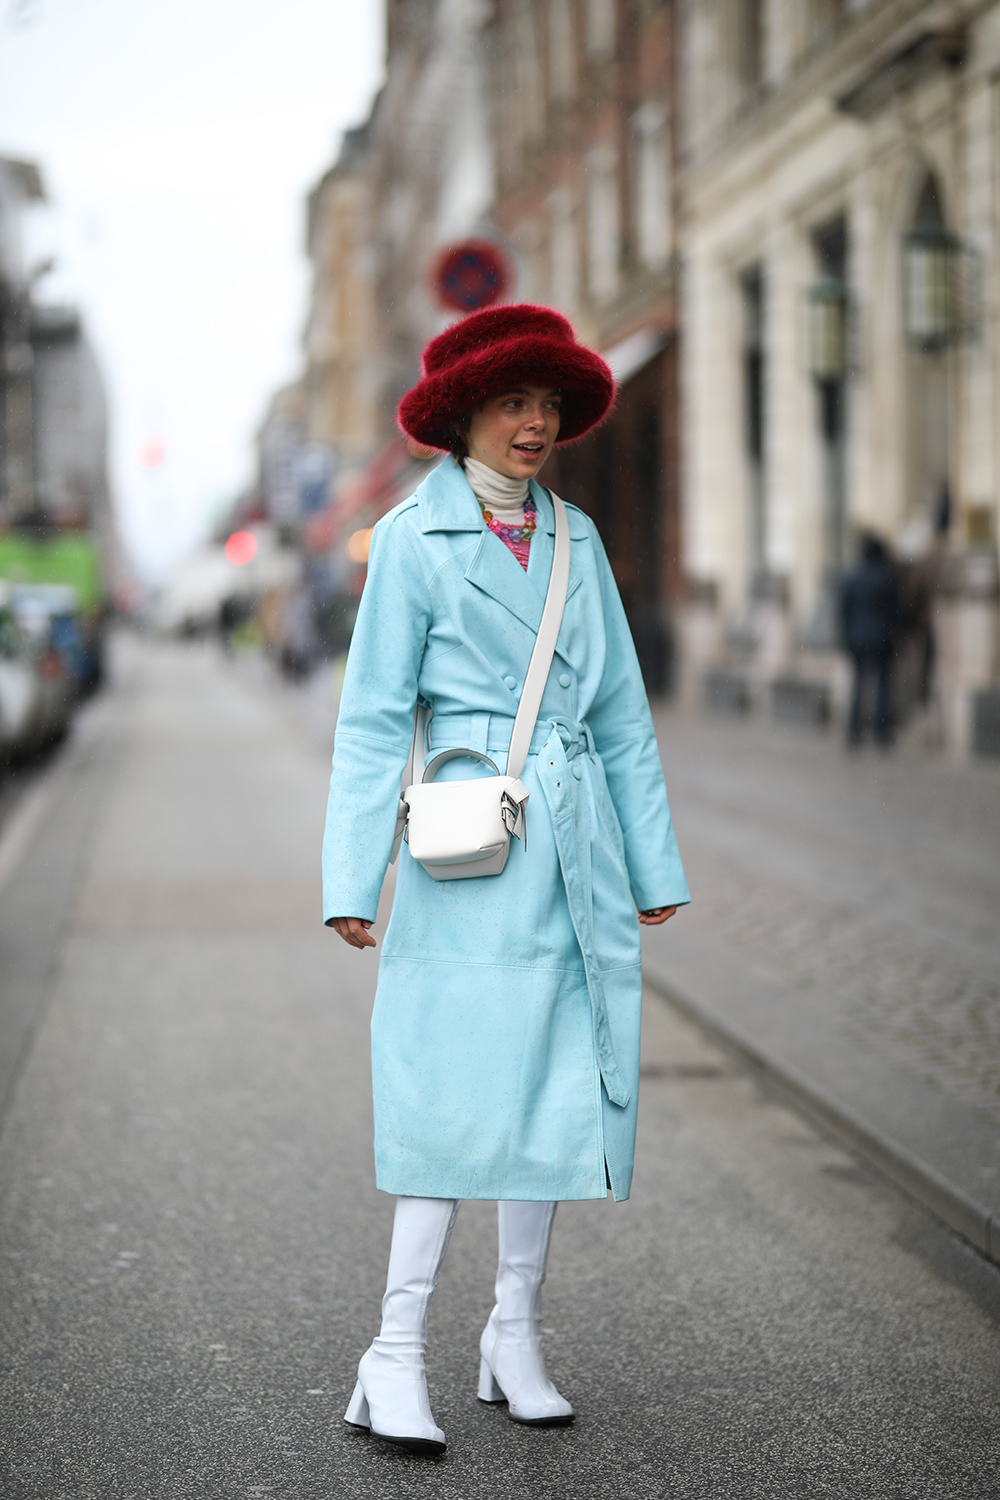 COPENHAGEN, DENMARK - JANUARY 29: Fashion Week guest wearing a blue coat and white bag before Helmstedt on January 29, 2020 in Copenhagen, Denmark. (Photo by Jeremy Moeller/Getty Images)